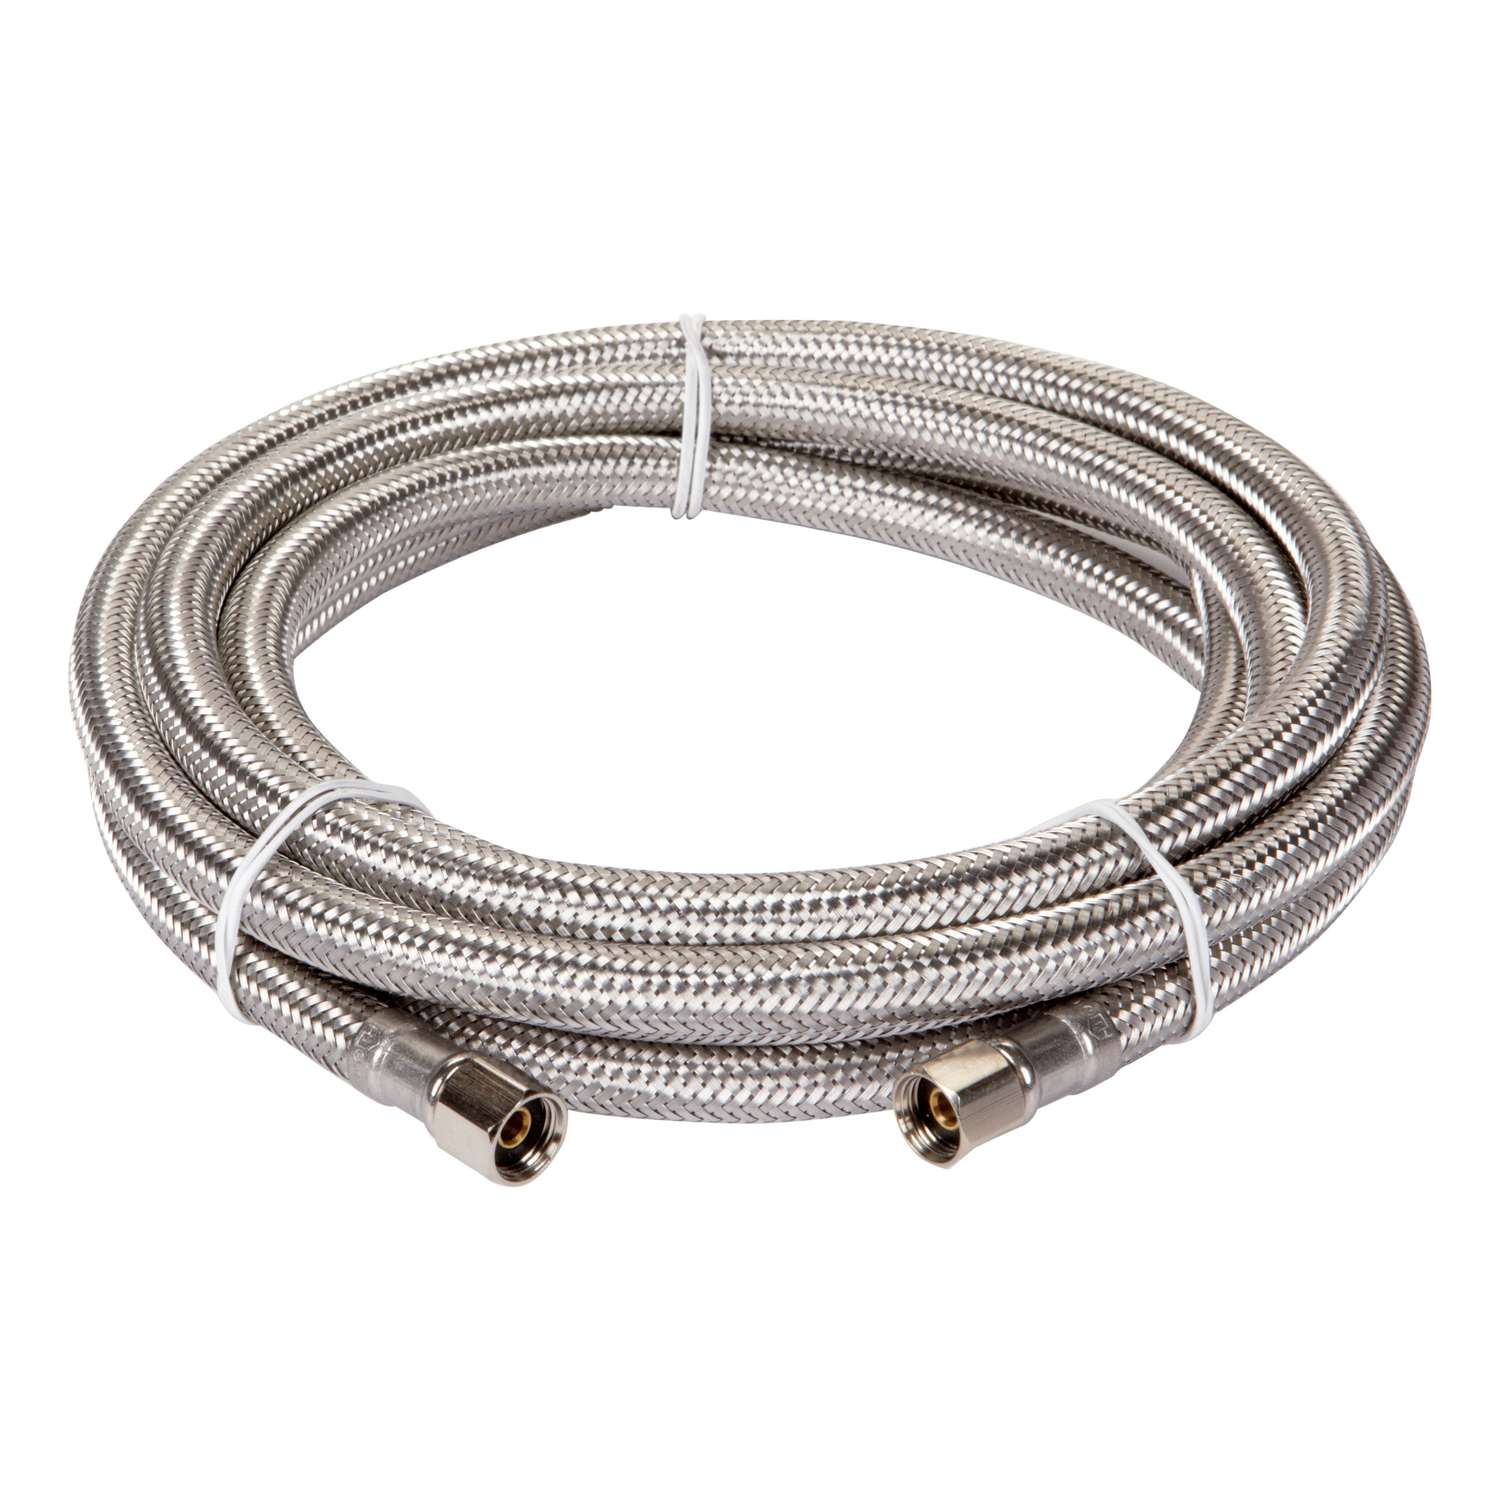 Ace Ice Maker Connector, Stainless Steel, Braided, 120 Inch